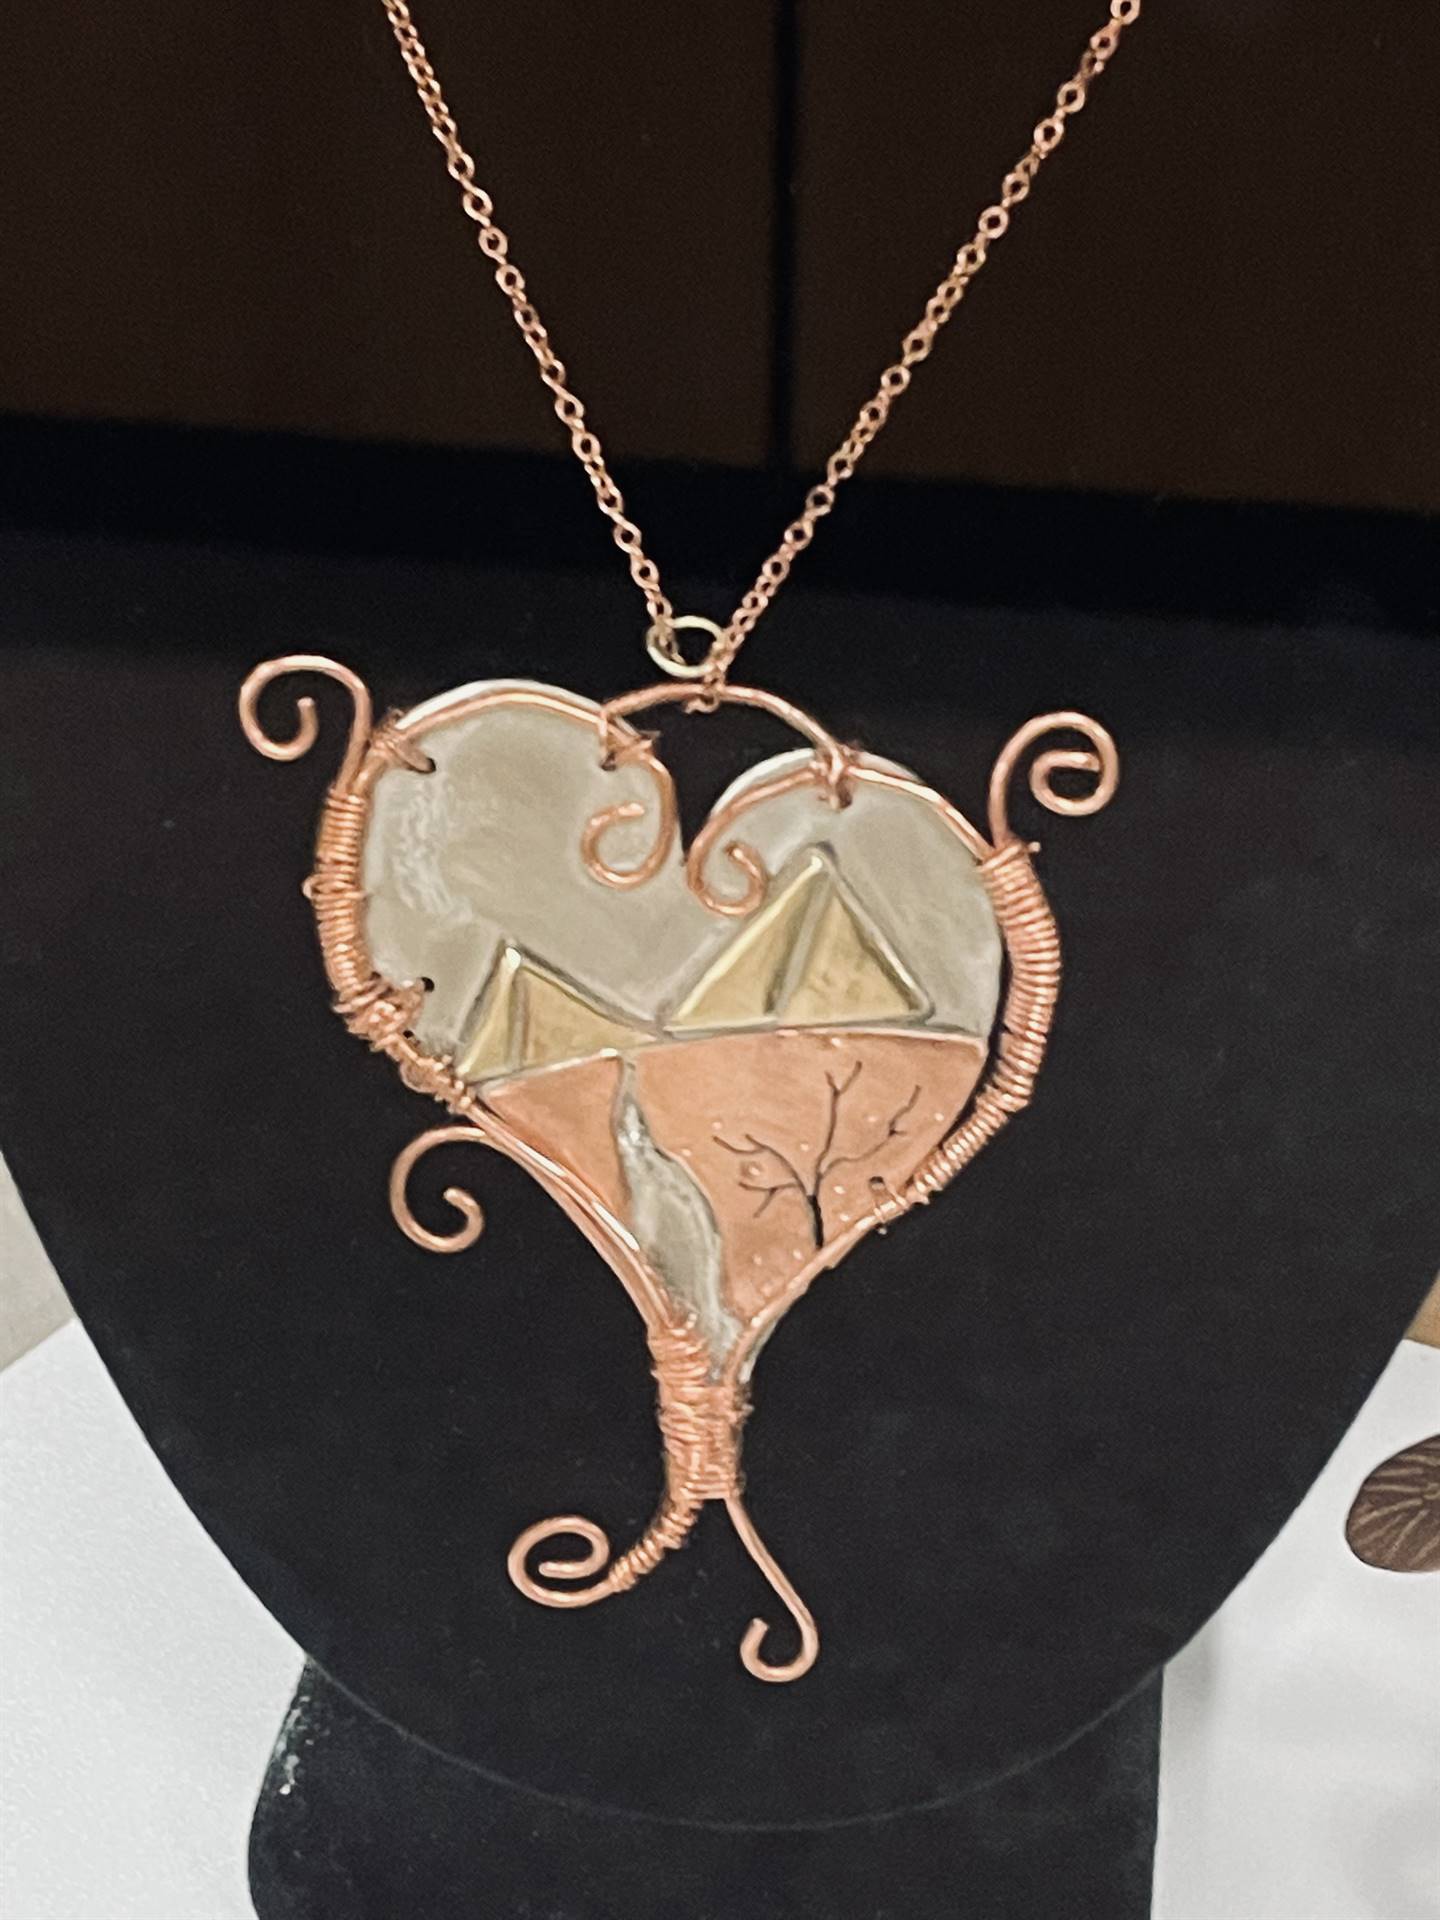 "Art Exposed 2022" Heart pendant made of mixed metals